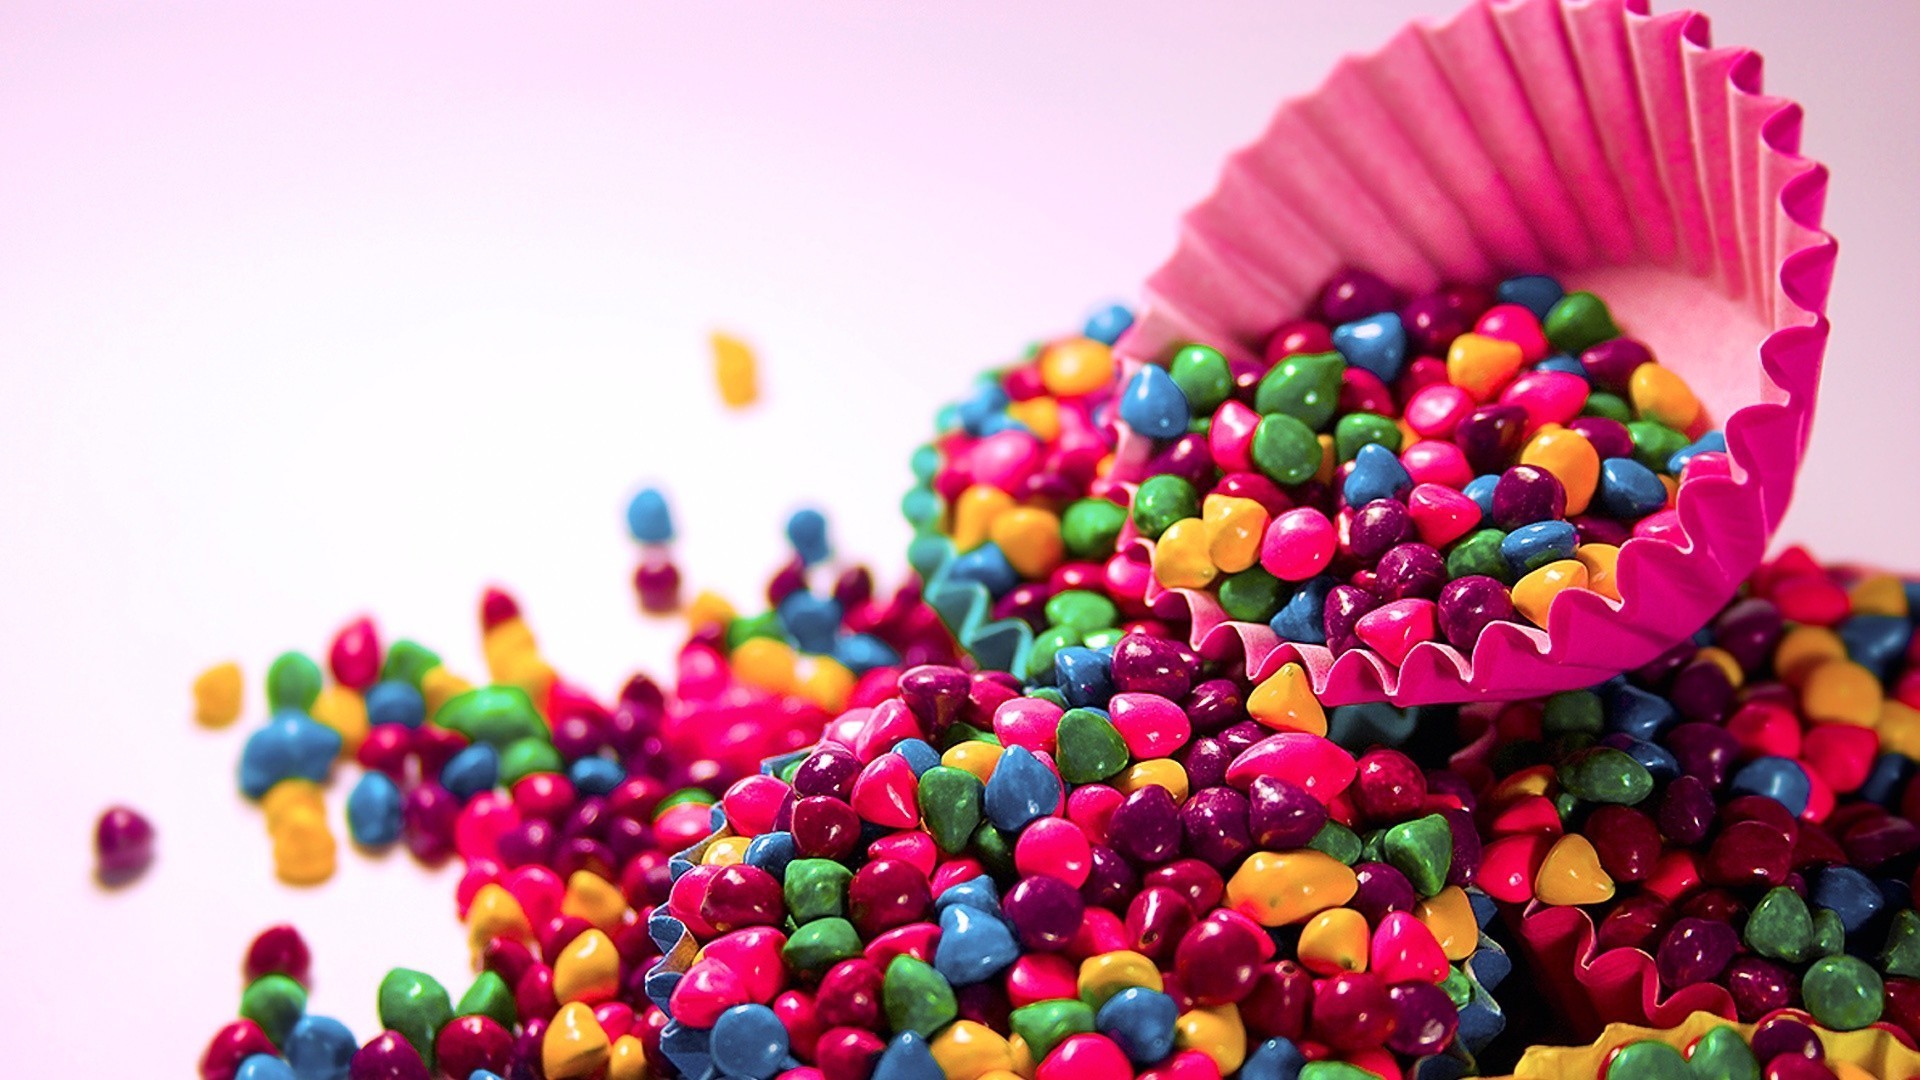 General 1920x1080 candy sweets colorful food